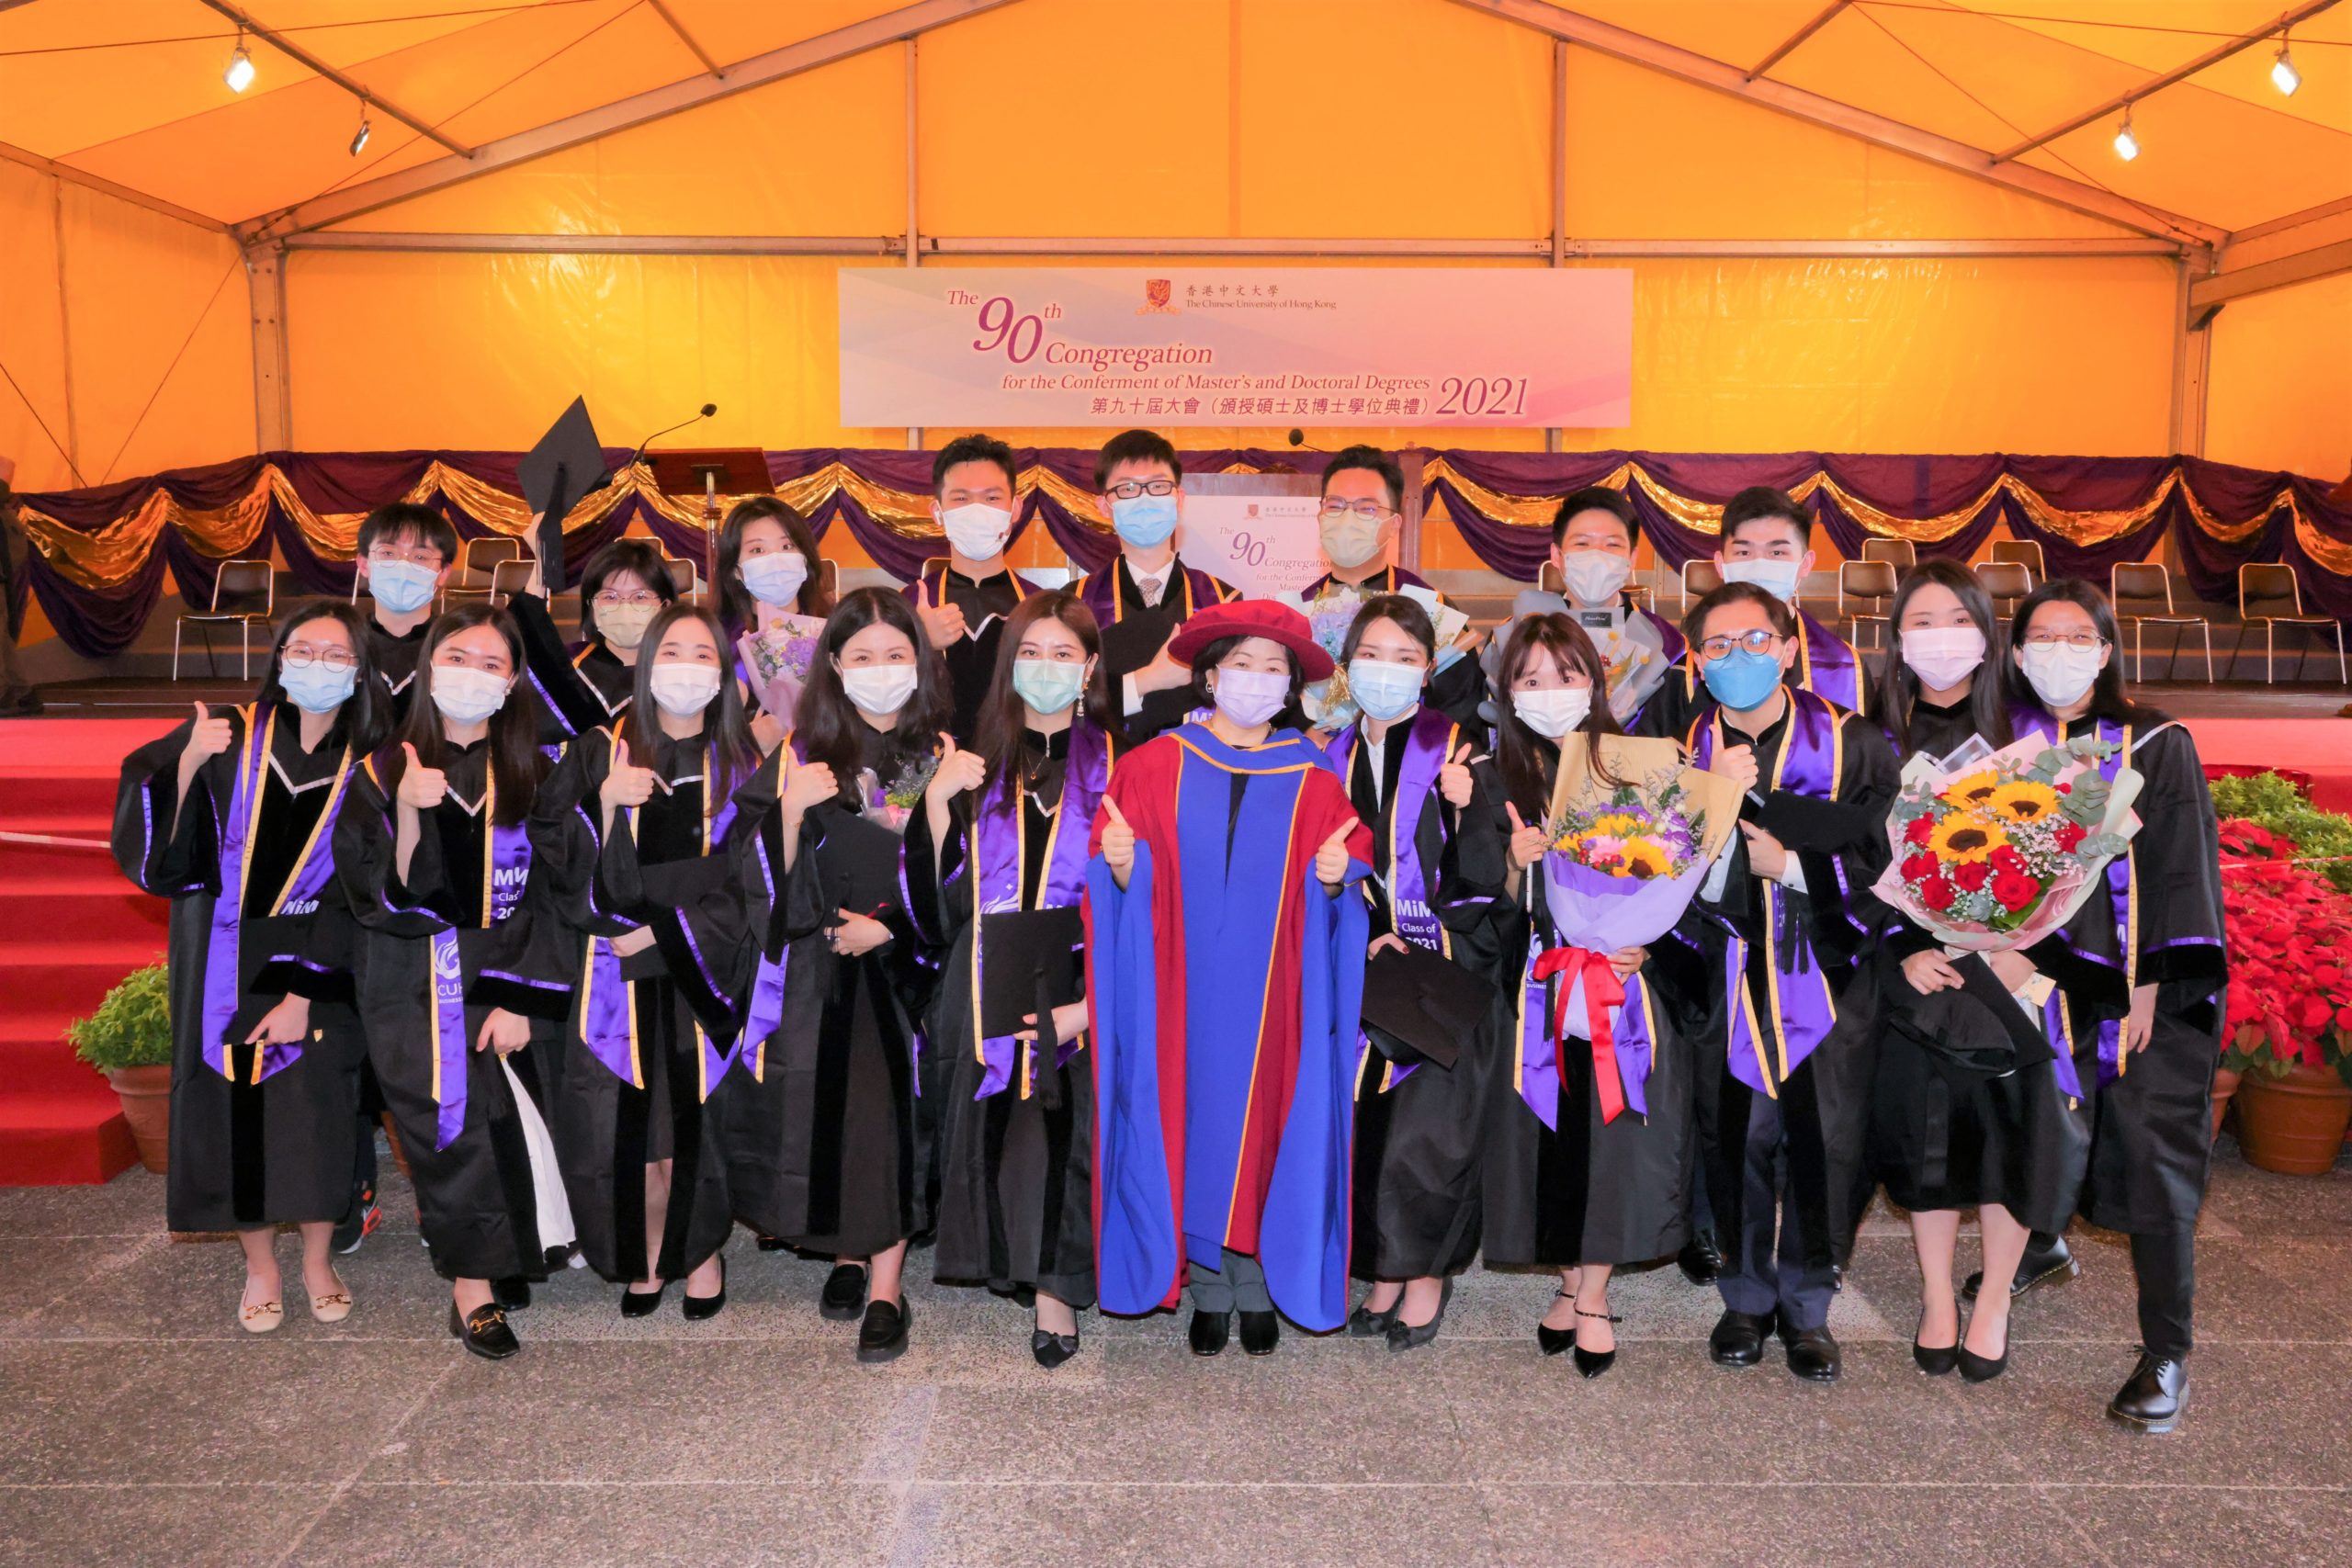 Prof. Dora C. Lau, Programme Director of MiM and graduates gathered in The University Mall to capture the joyful moment